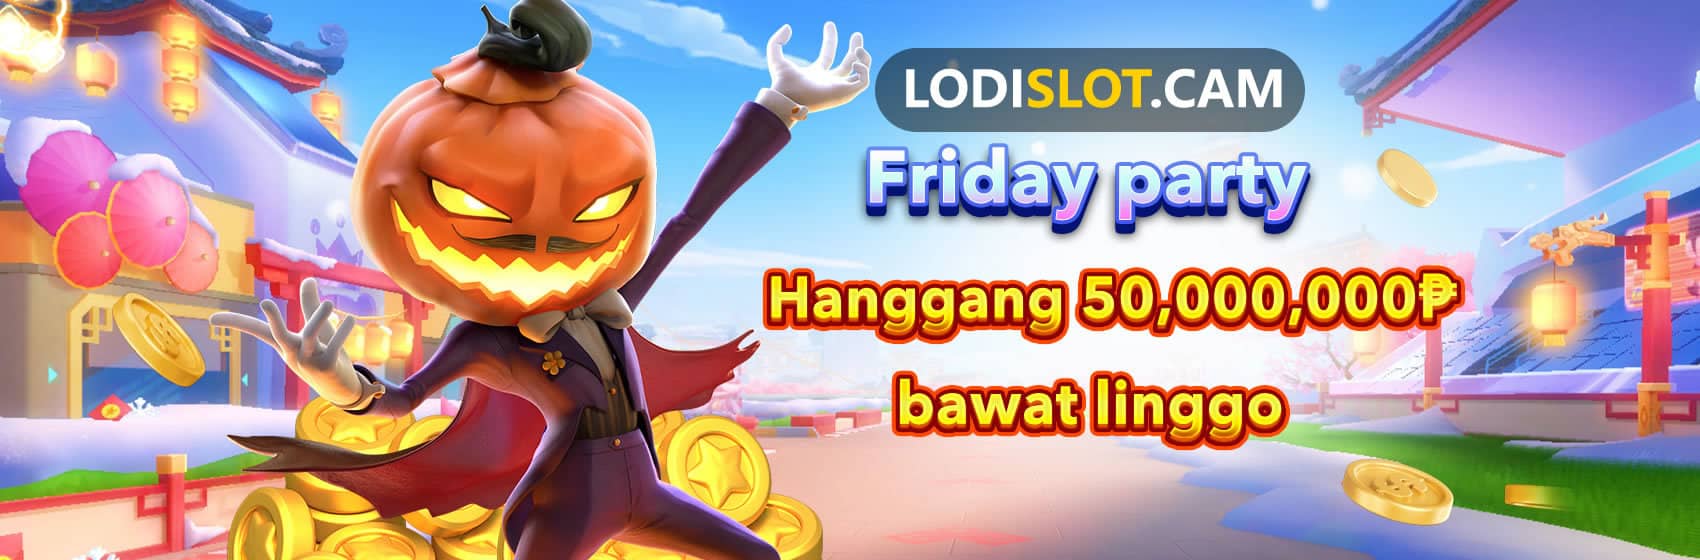 lodislot friday party 500000000 php